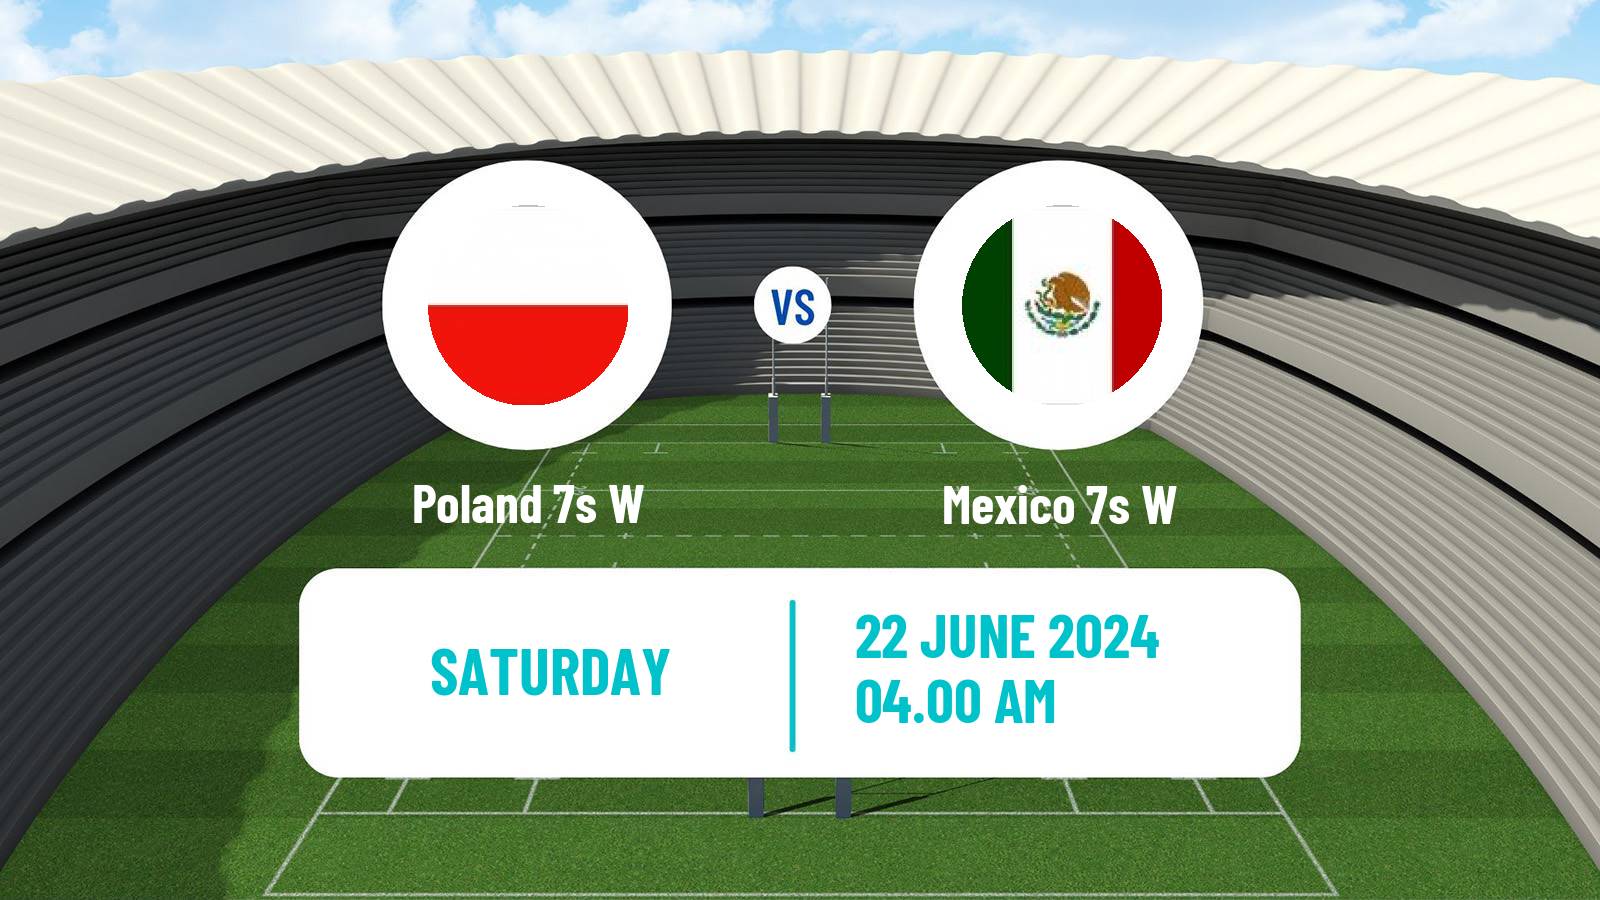 Rugby union Olympic Games 7s Rugby Women Poland 7s W - Mexico 7s W